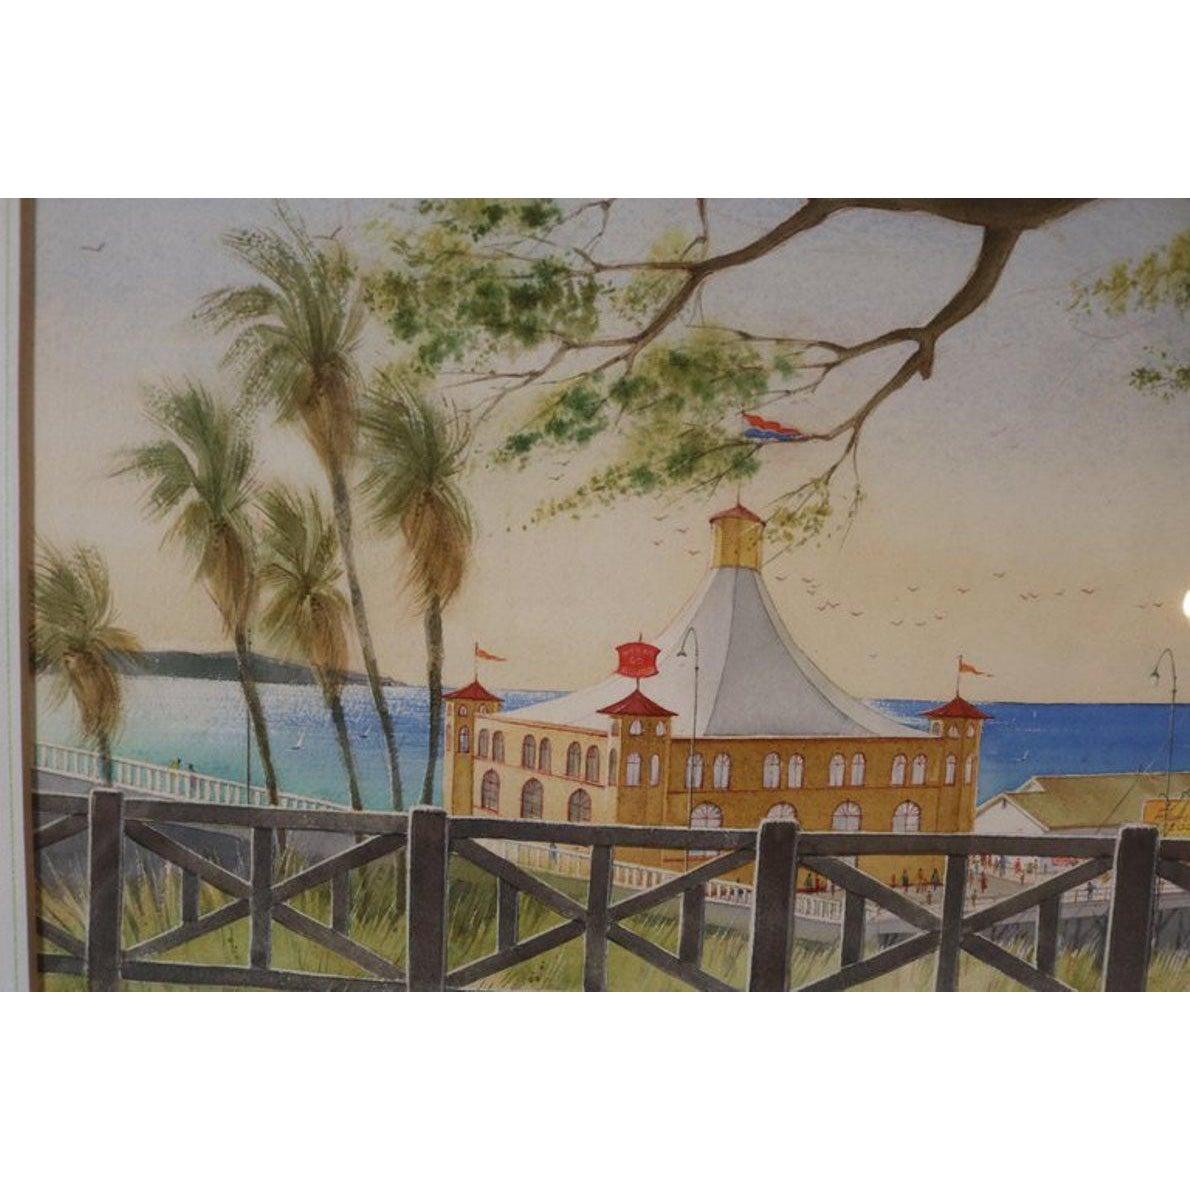 Pacific Palisades Watercolor by Stanton Manolakas 5